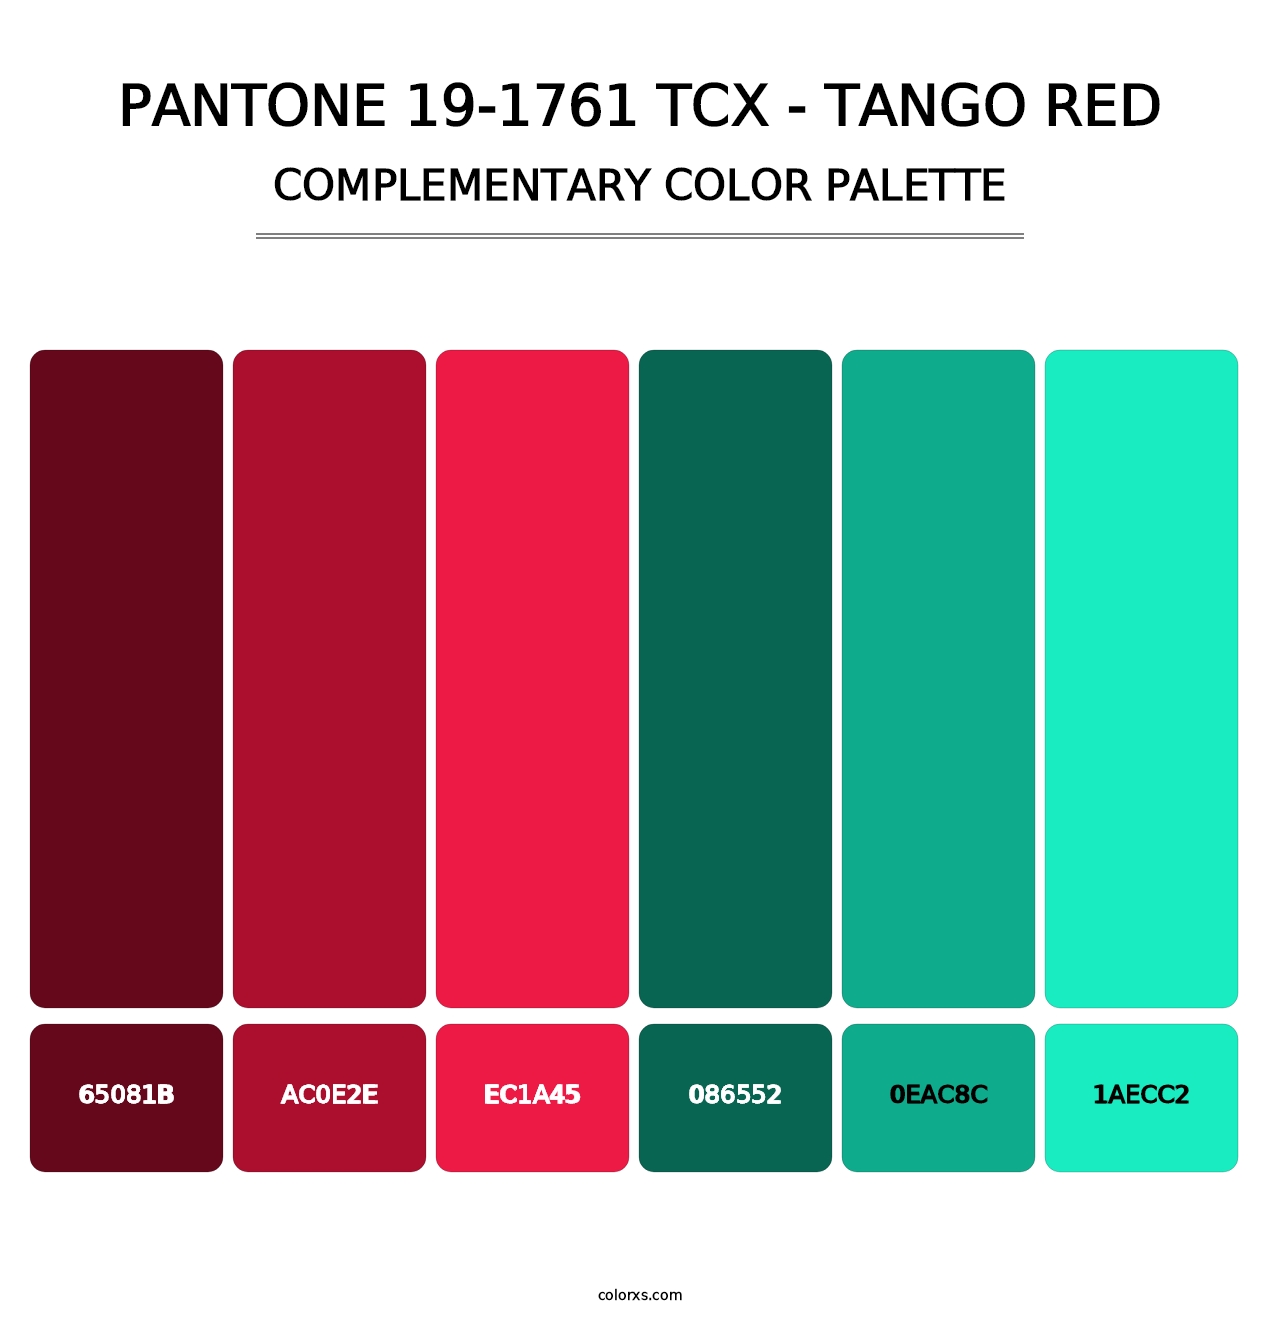 PANTONE 19-1761 TCX - Tango Red - Complementary Color Palette